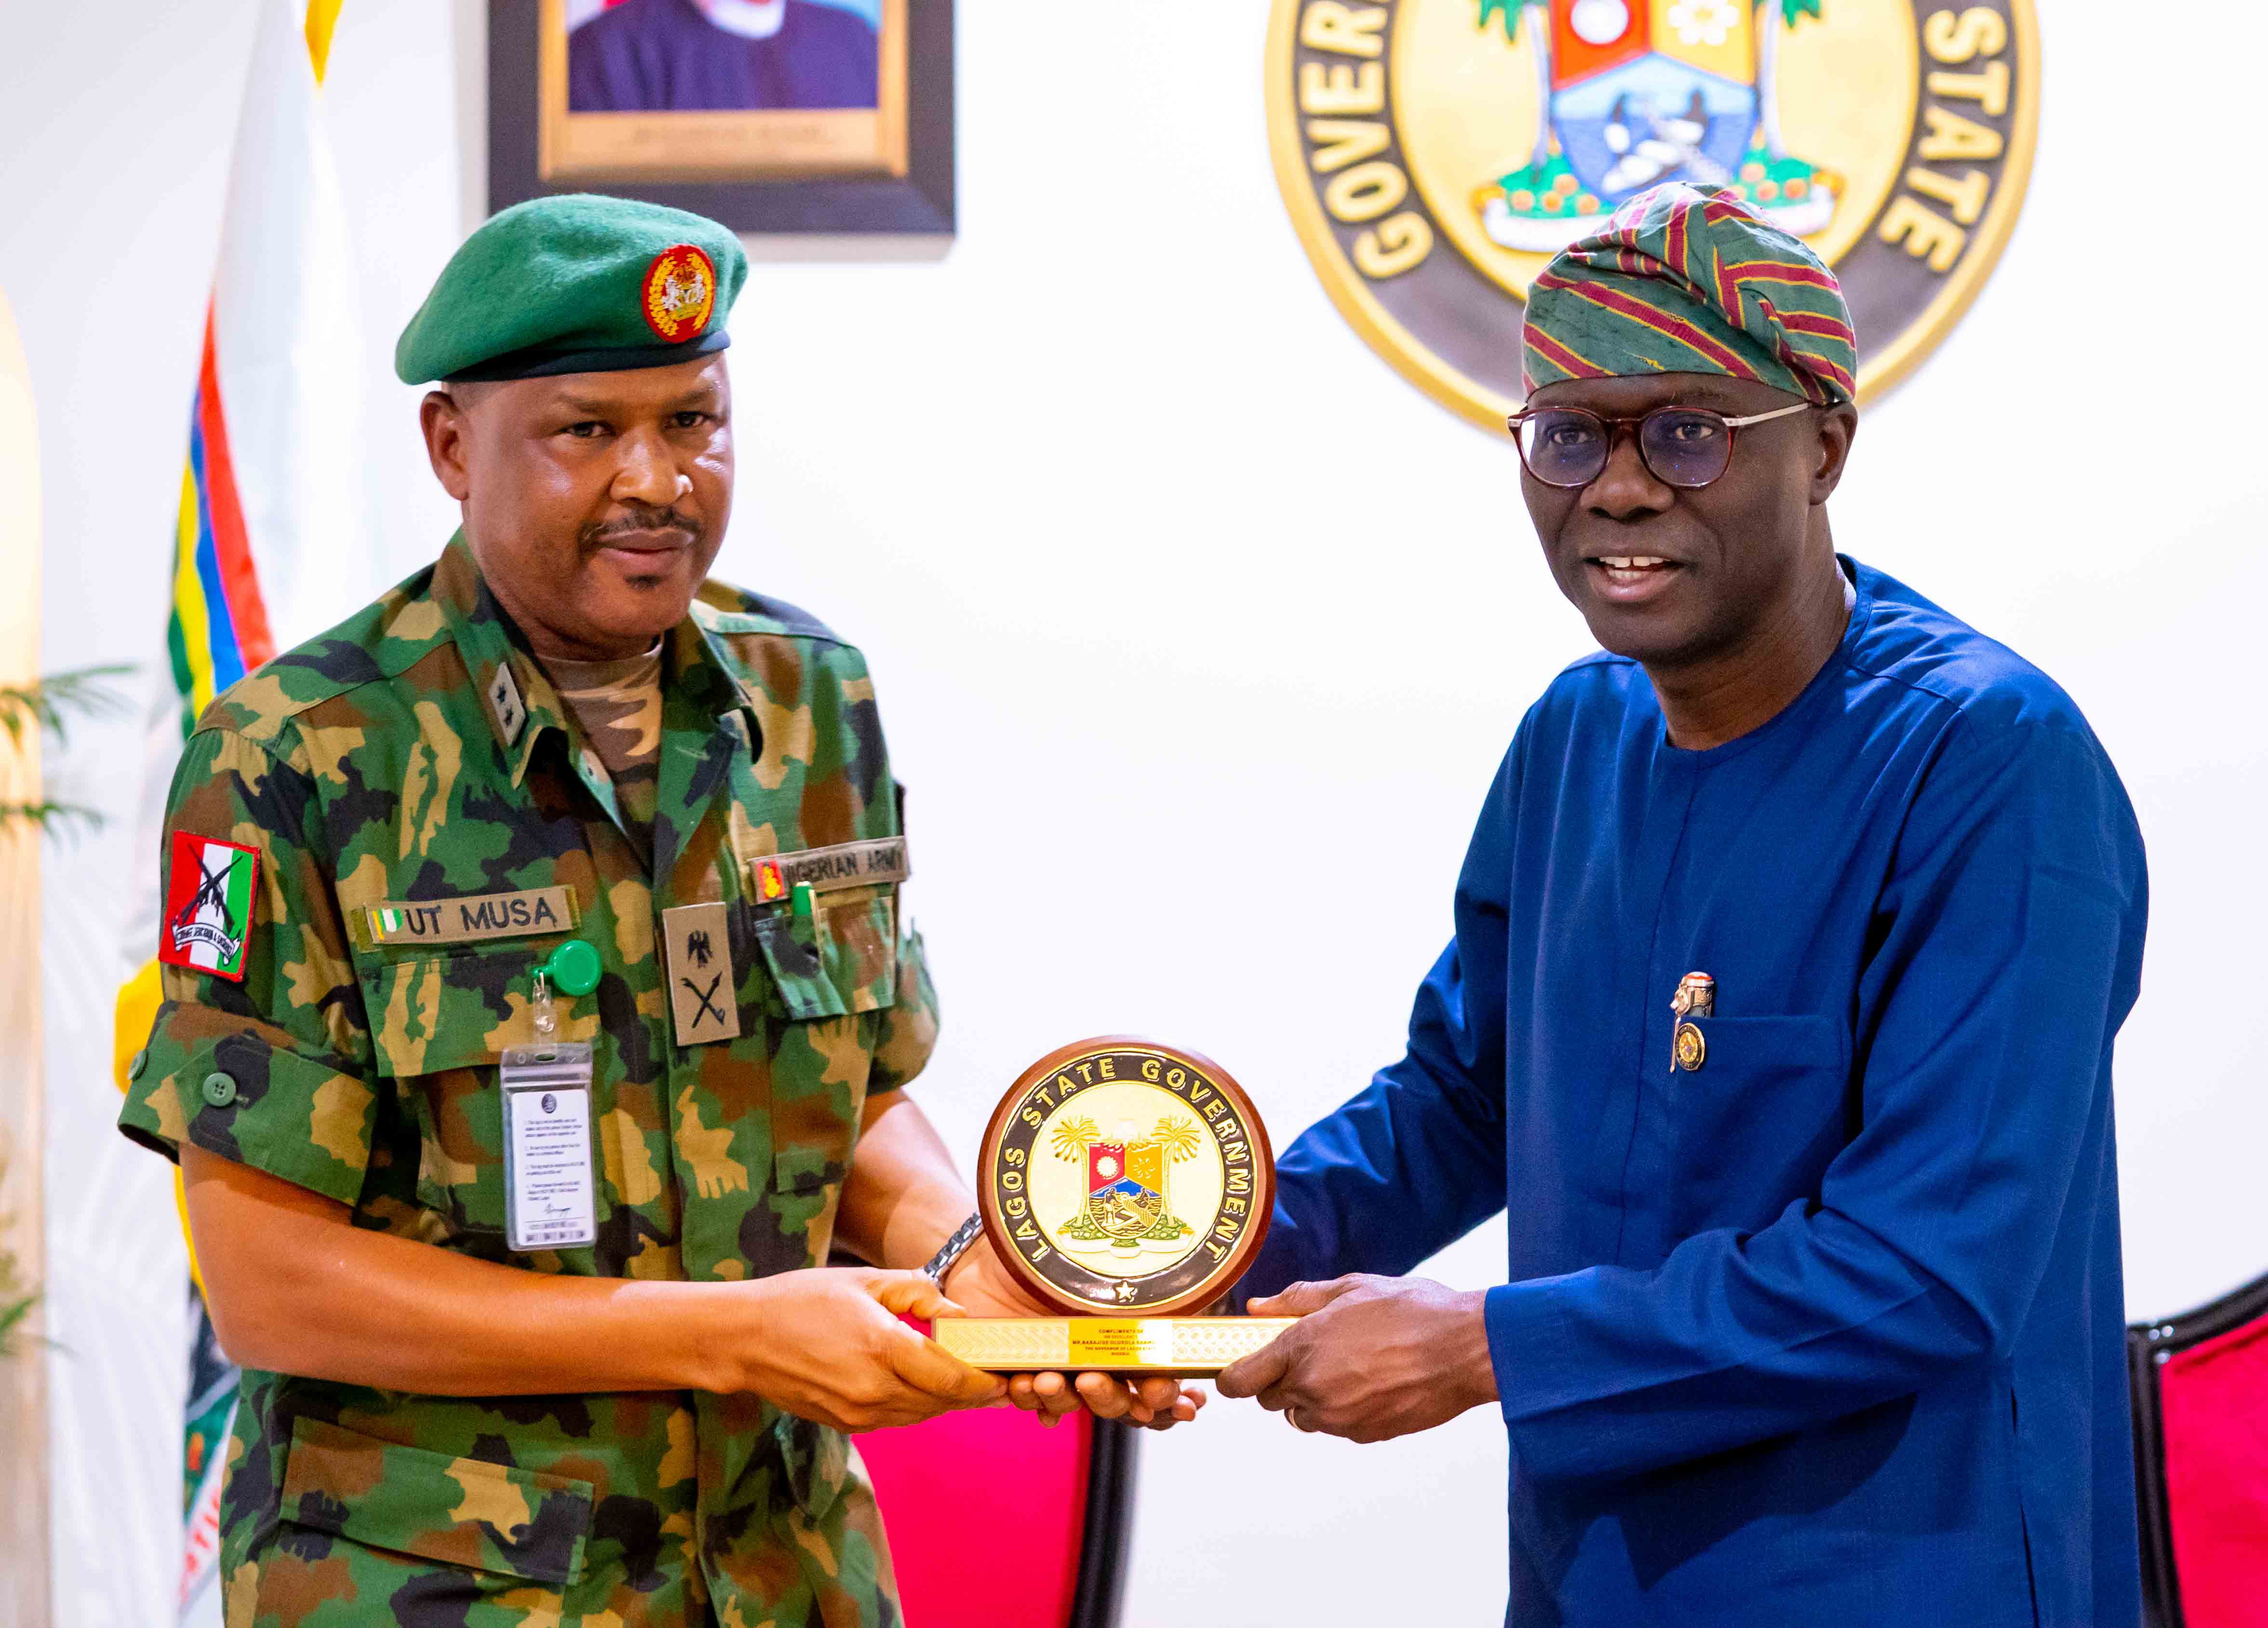 WE’LL CONTINUE TO ENSURE LAGOS REMAINS MOST PEACEFUL, SECURE STATE IN NIGERIA, SAYS SANWO-OLU